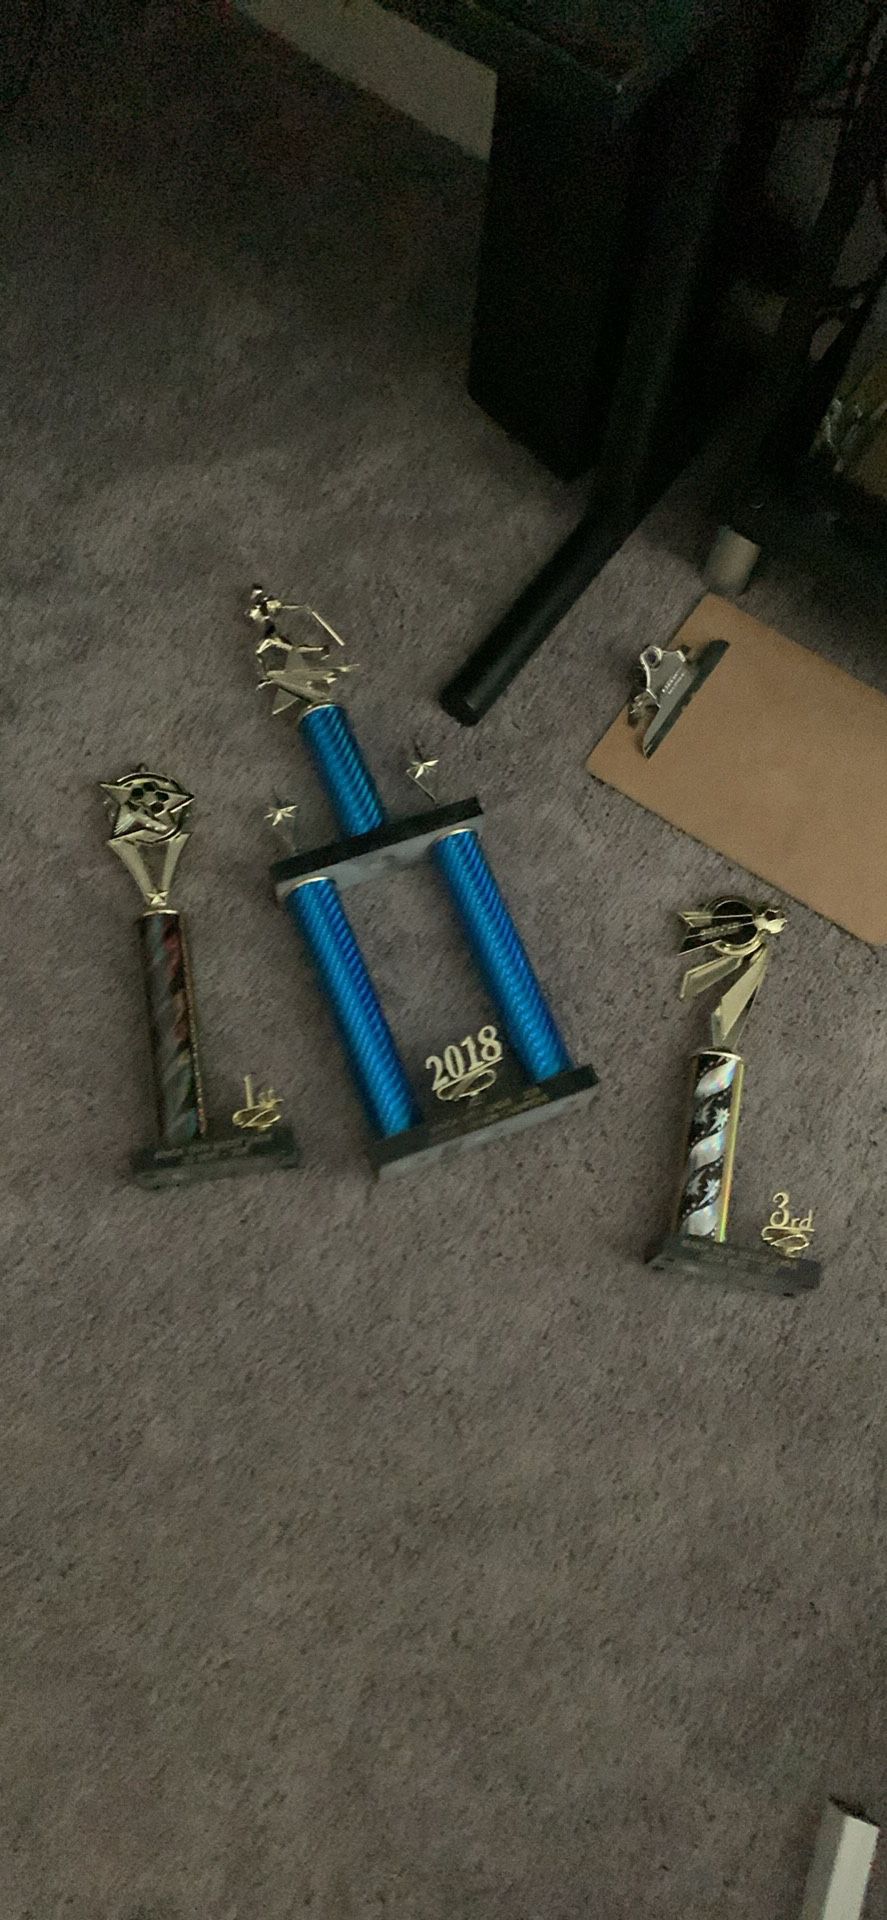 old trophy’s $5 bucks for all